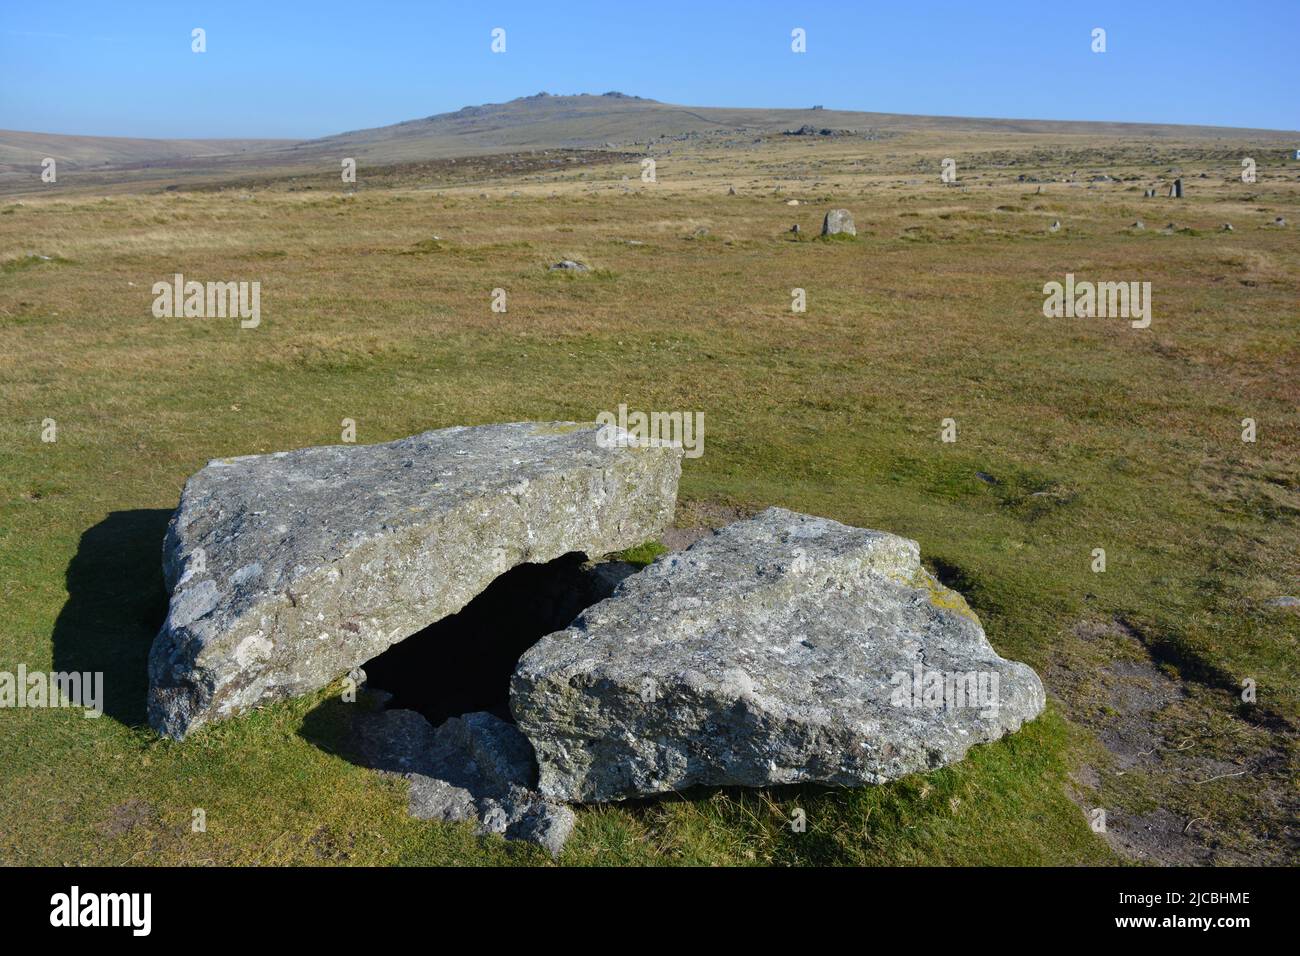 Stone lined burial chamber or cist, a prehistoric antiquity associated with the Neolithic to Middle Bronze Age settlement site, Merrivale, Dartmoor Na Stock Photo